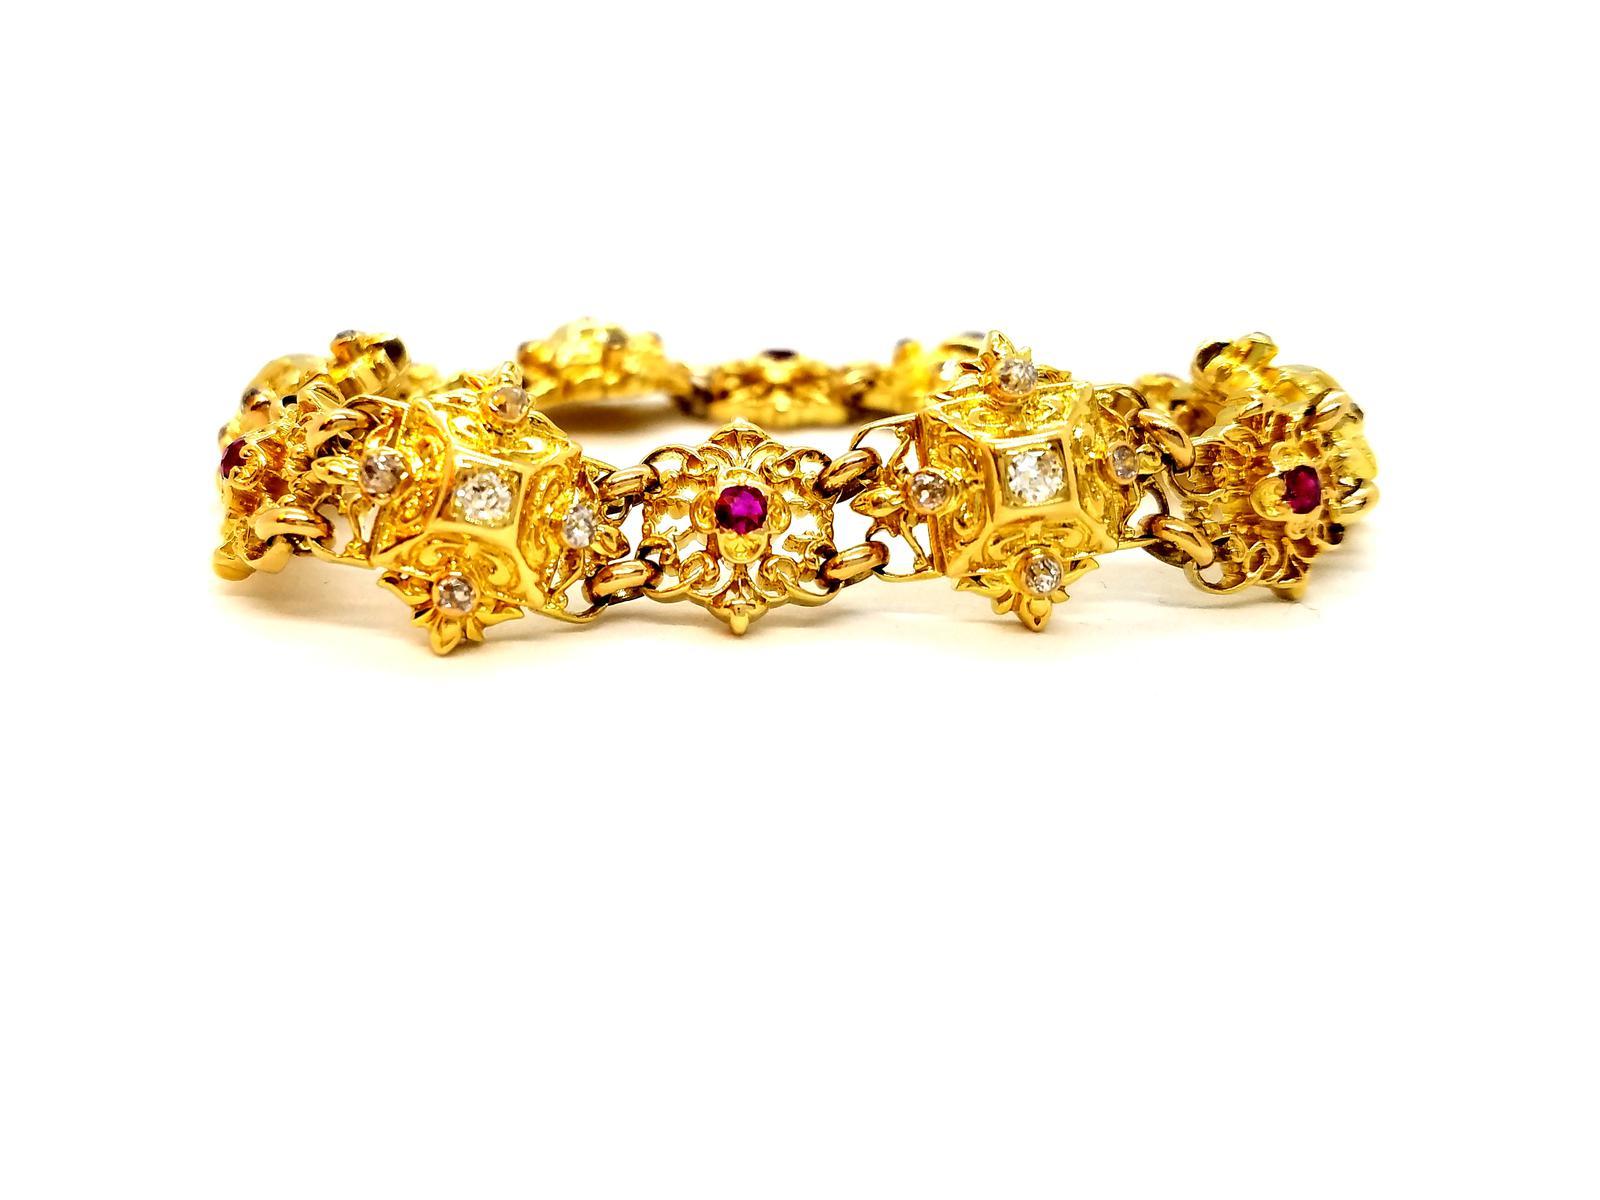 Bracelet Yellow Gold 750 thousandths (18 carats). set with 30 old cut diamonds totaling about 0.78 ct 6 round rubies for about 0.24 ct in total safety chain. length: 19.5 cm. width: 1.52 cm. thickness: 0.58 cm. total weight: 39.31 g. punched.